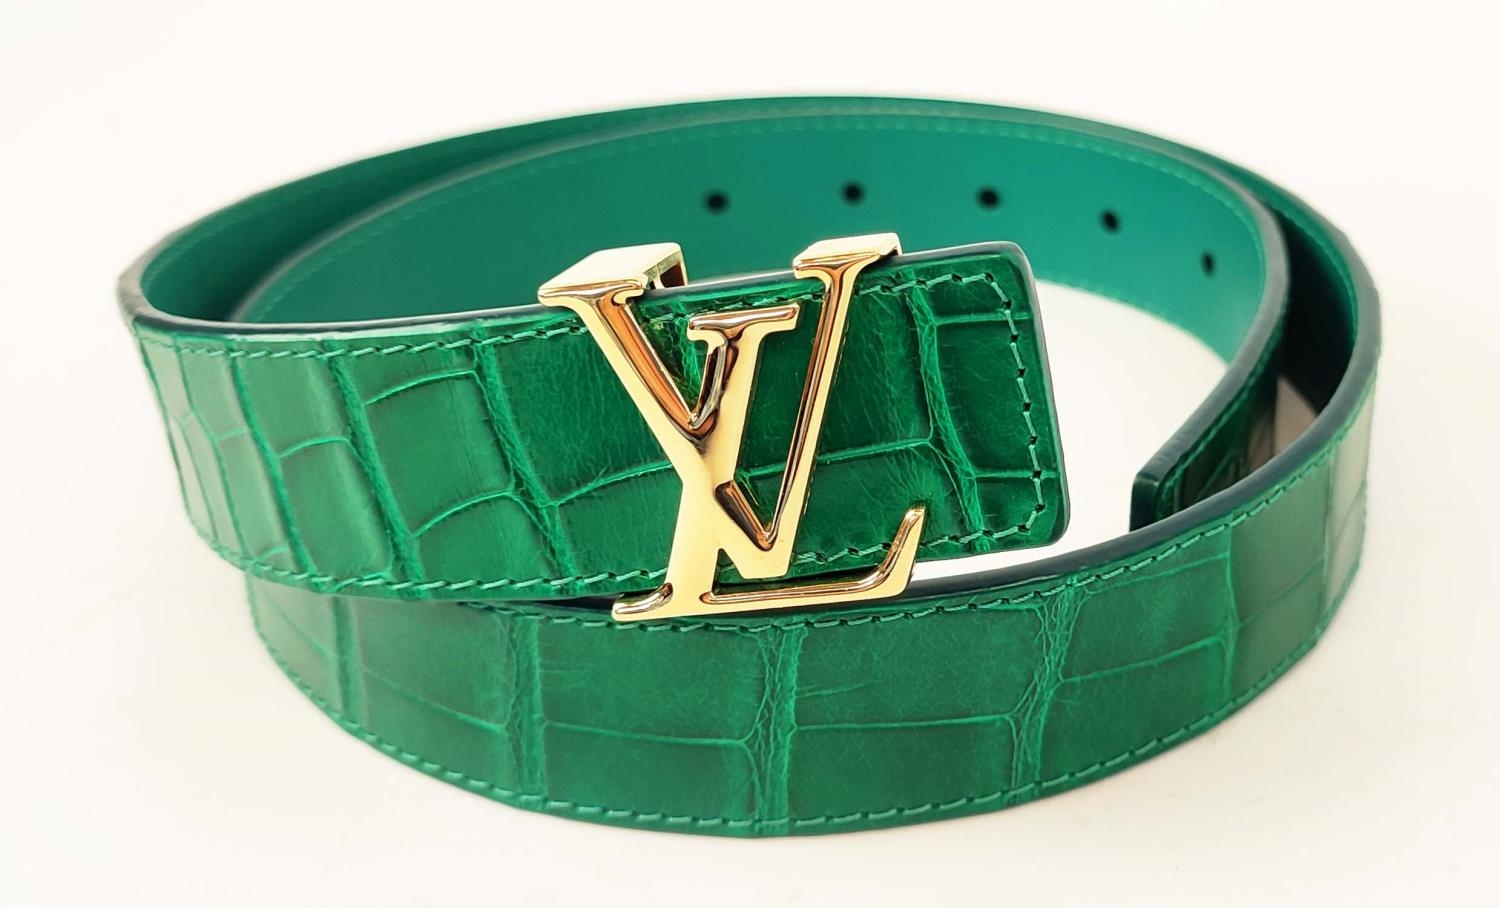 LOUIS VUITTON CROCODILE BELT, green exotic leather with gold tone initials at the front, size 80/32,